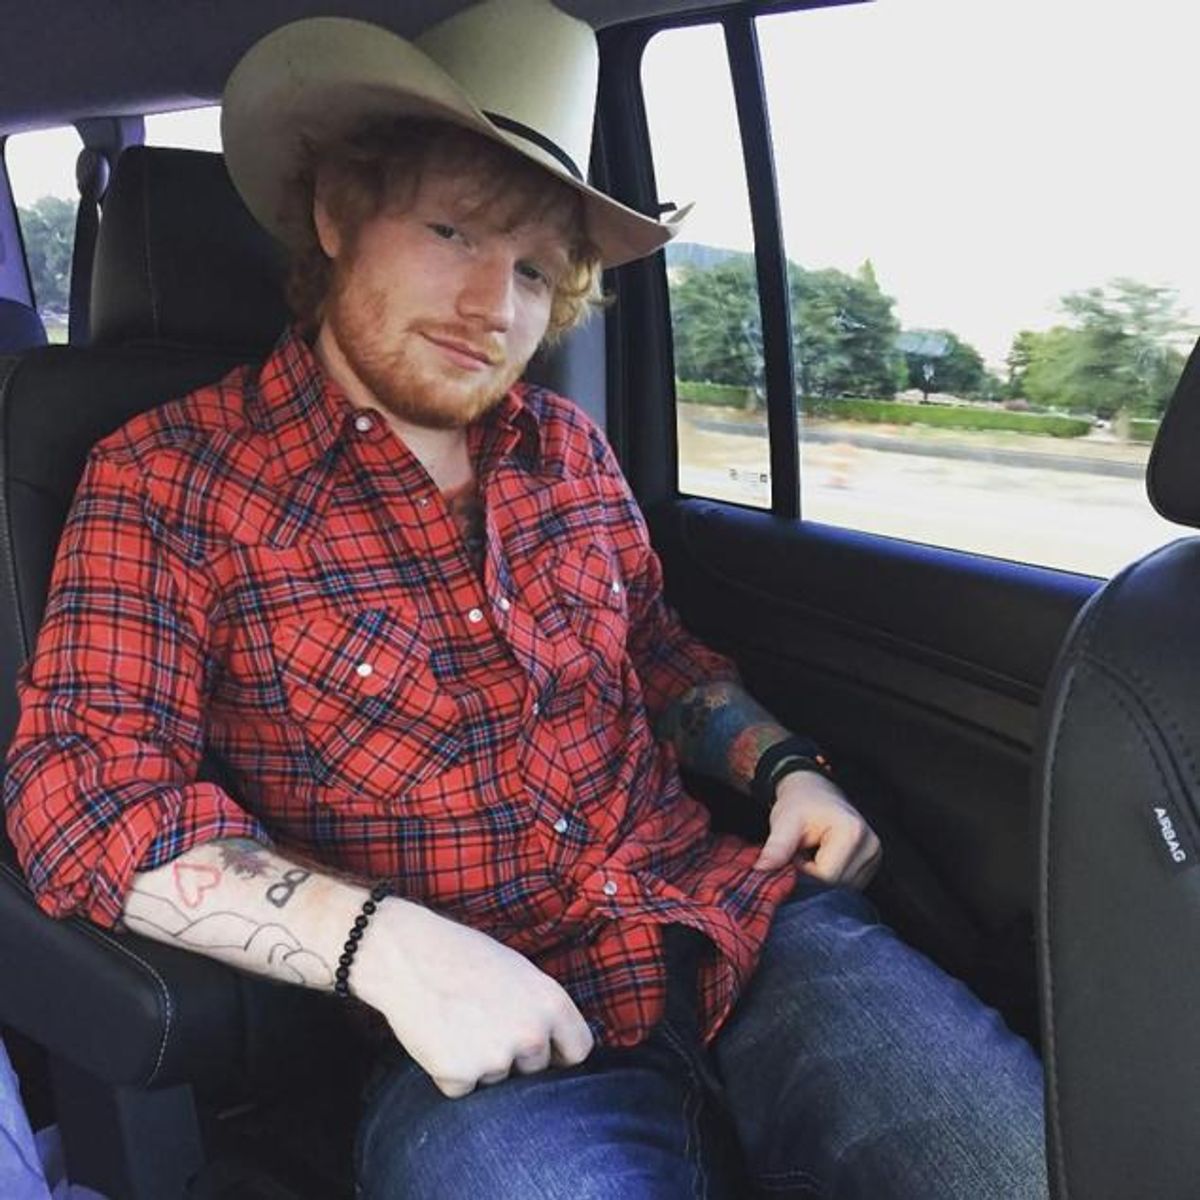 Photographic Evidence That Ed Sheeran Is Hot